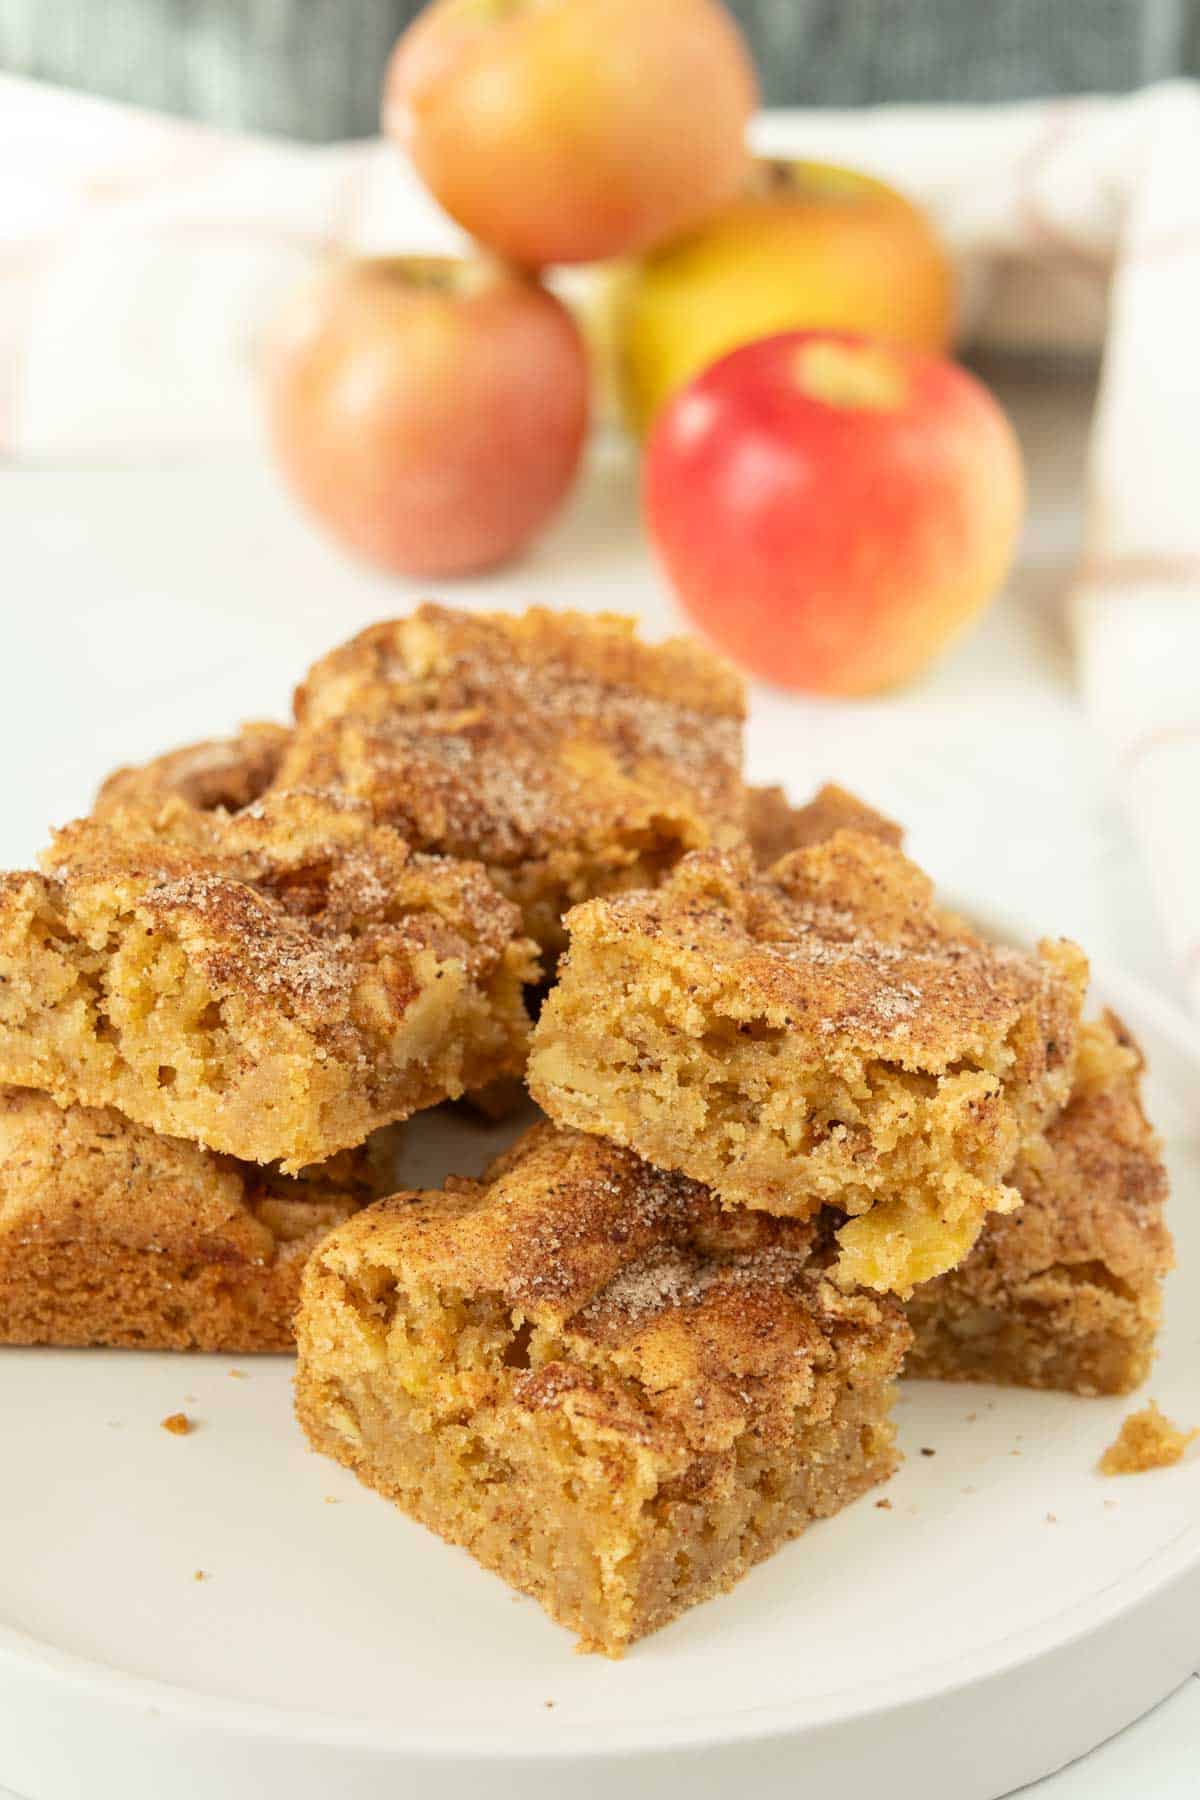 Cinnamon apple squares on a white plate.